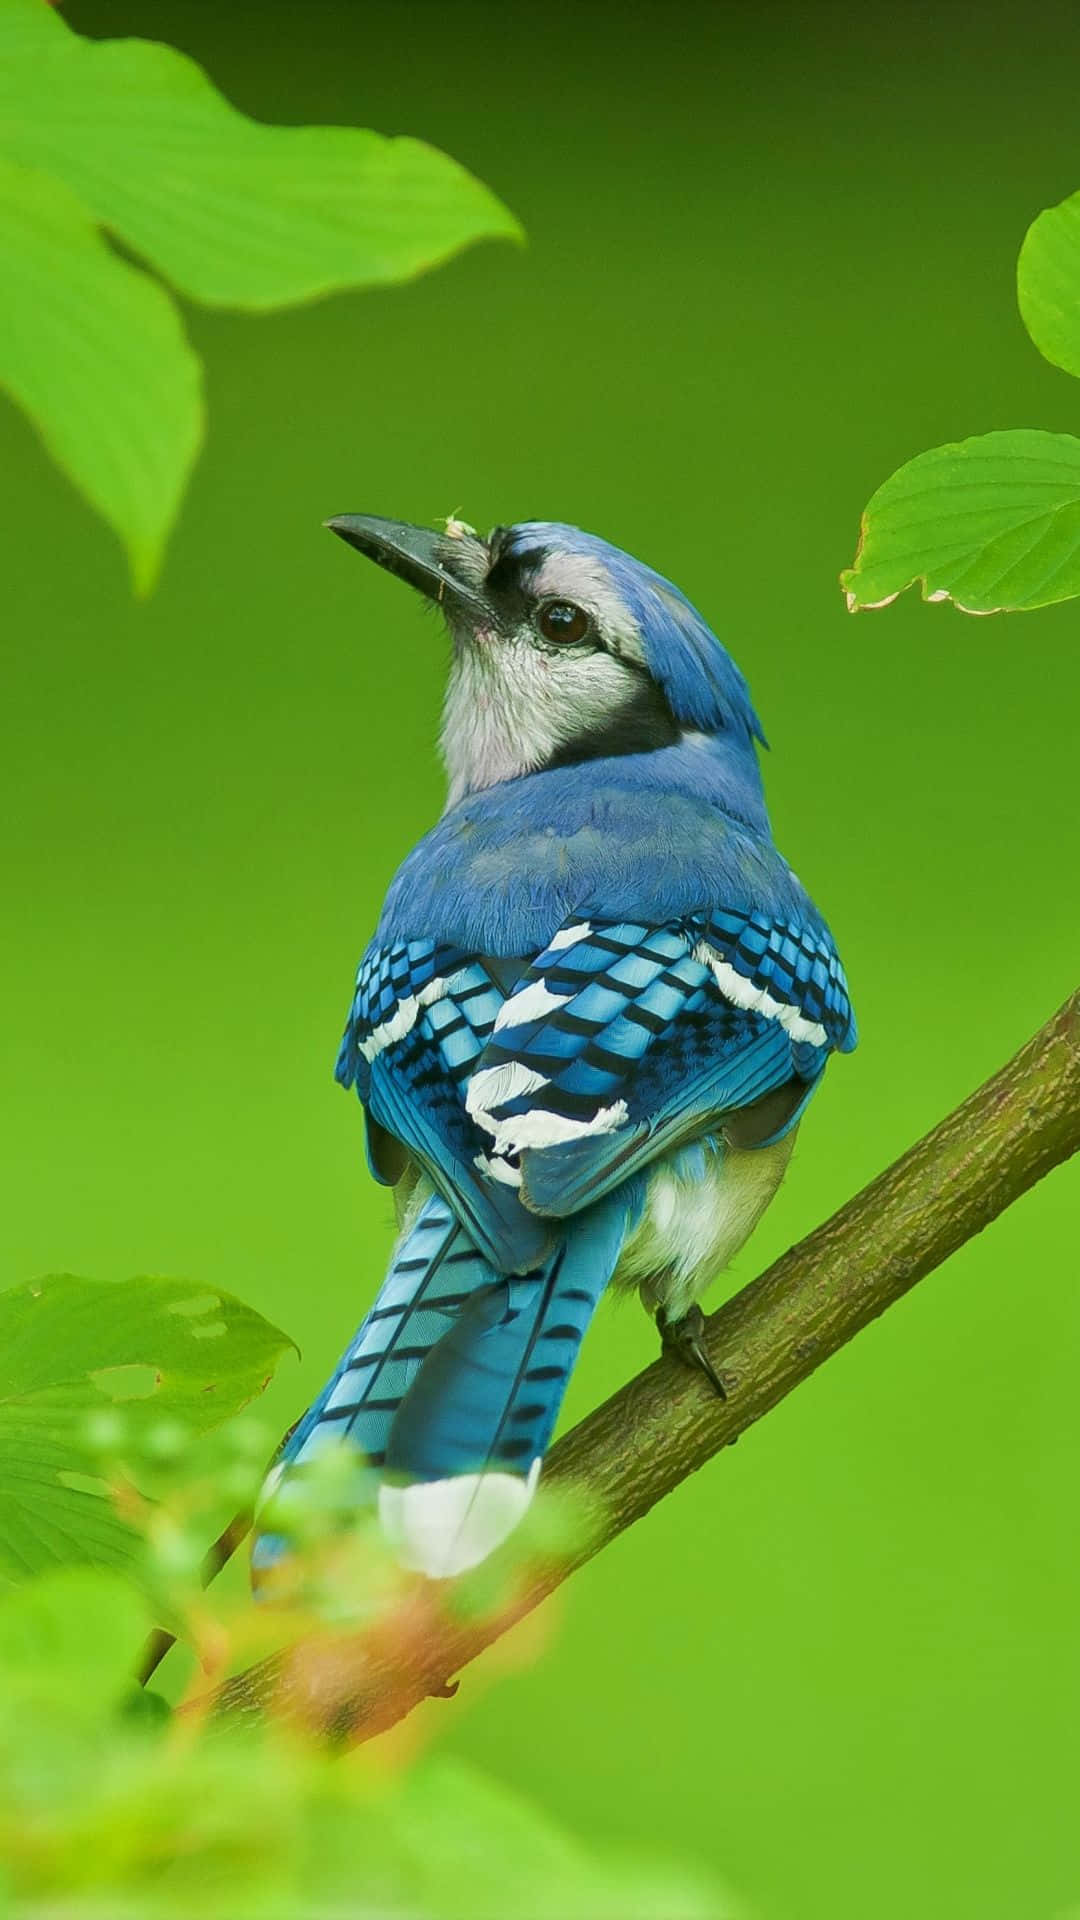 A Blue Jay Is Sitting On A Branch With Green Leaves